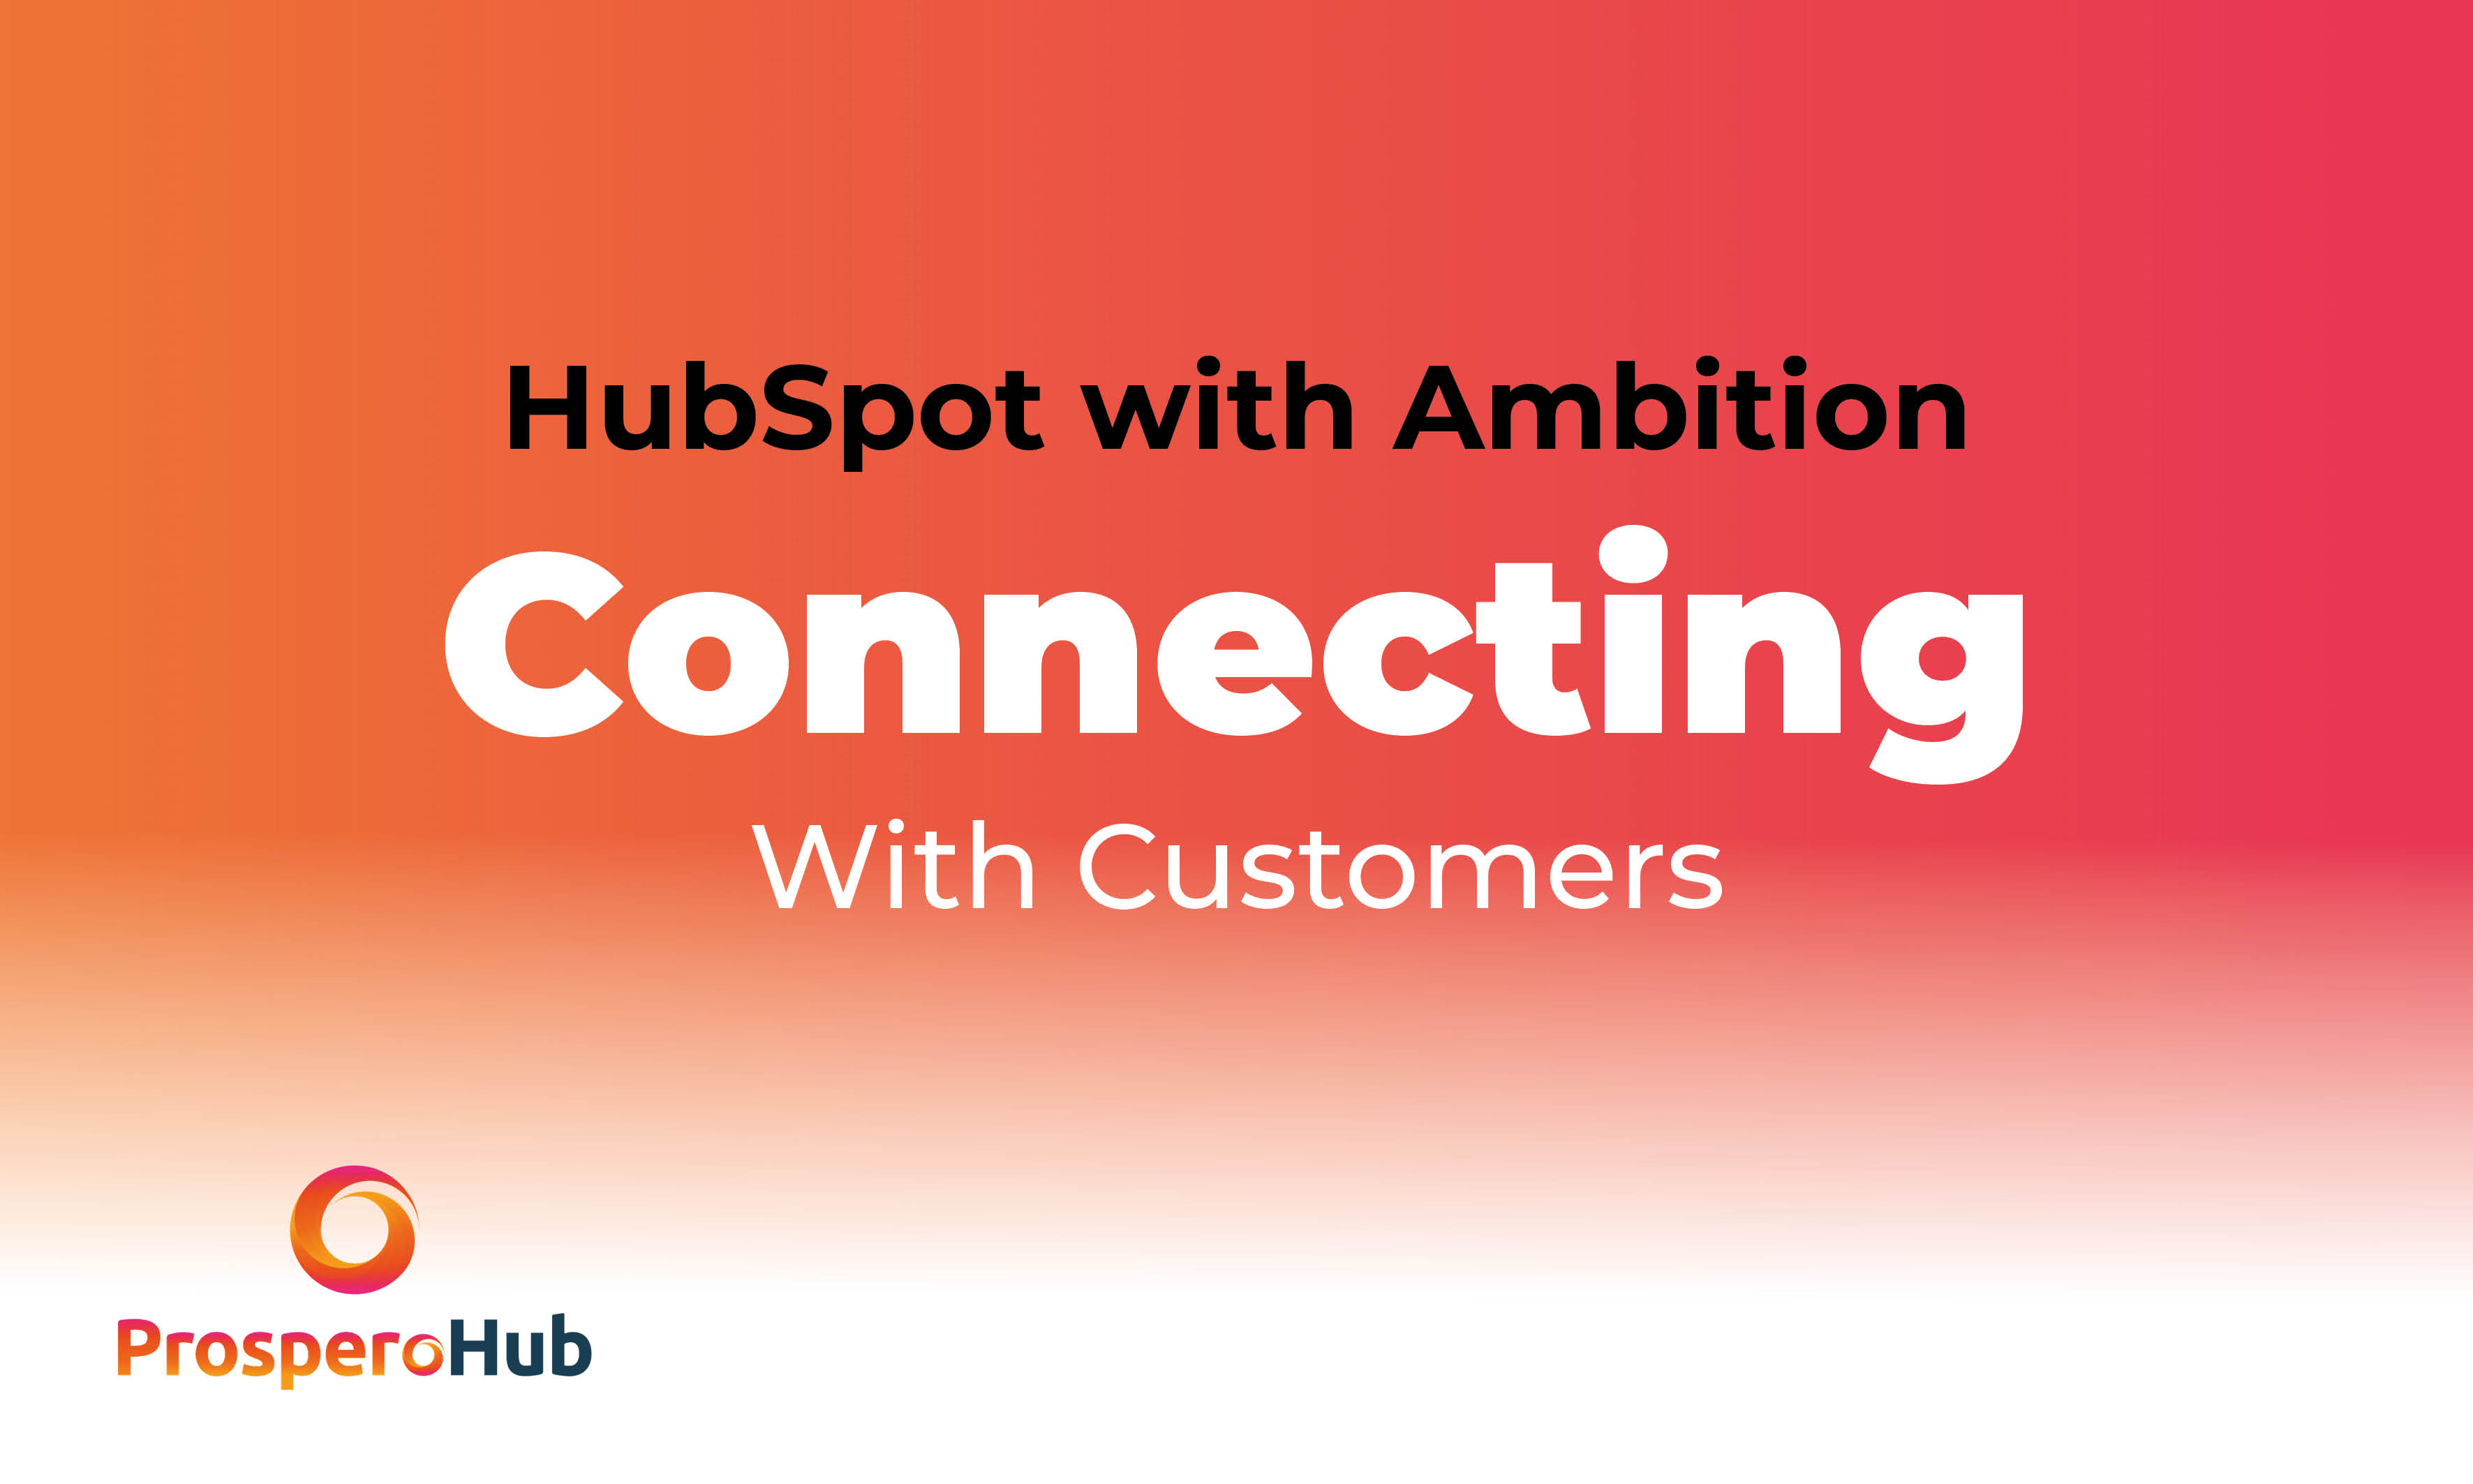 HubSpot with Ambition connecting with customers